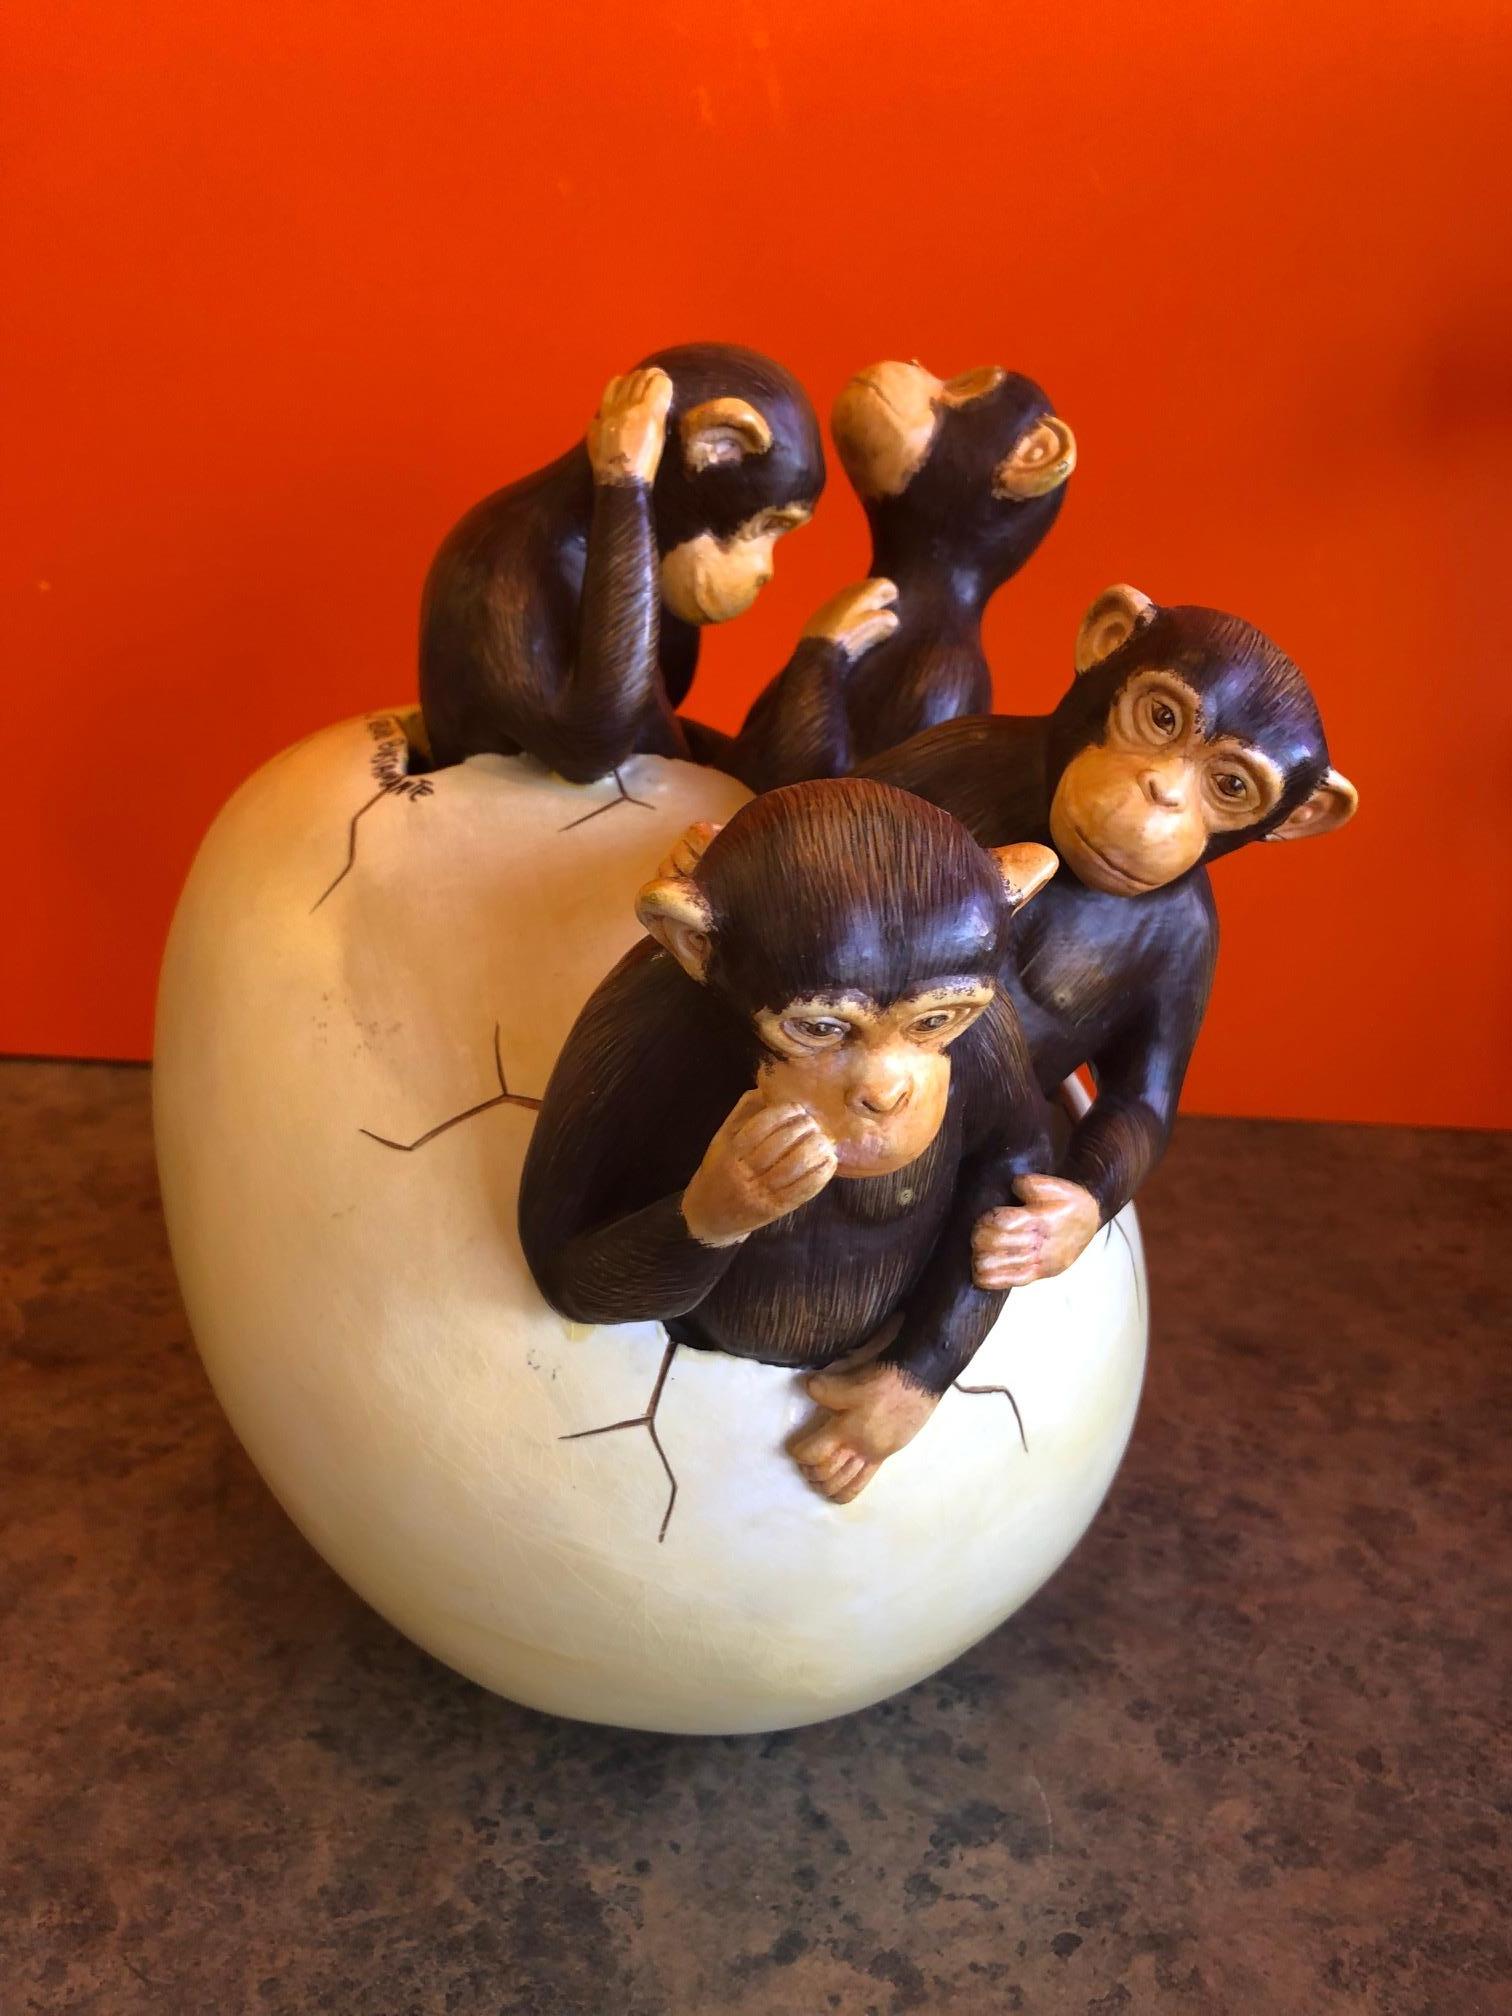 Fabulous ceramic hatching monkeys from egg sculpture by renowned Mexican artist, Sergio Bustamante, circa 1970s. The piece which is signed by the artist, depicts four baby monkeys hatching from an egg and is truly realistic with amazing